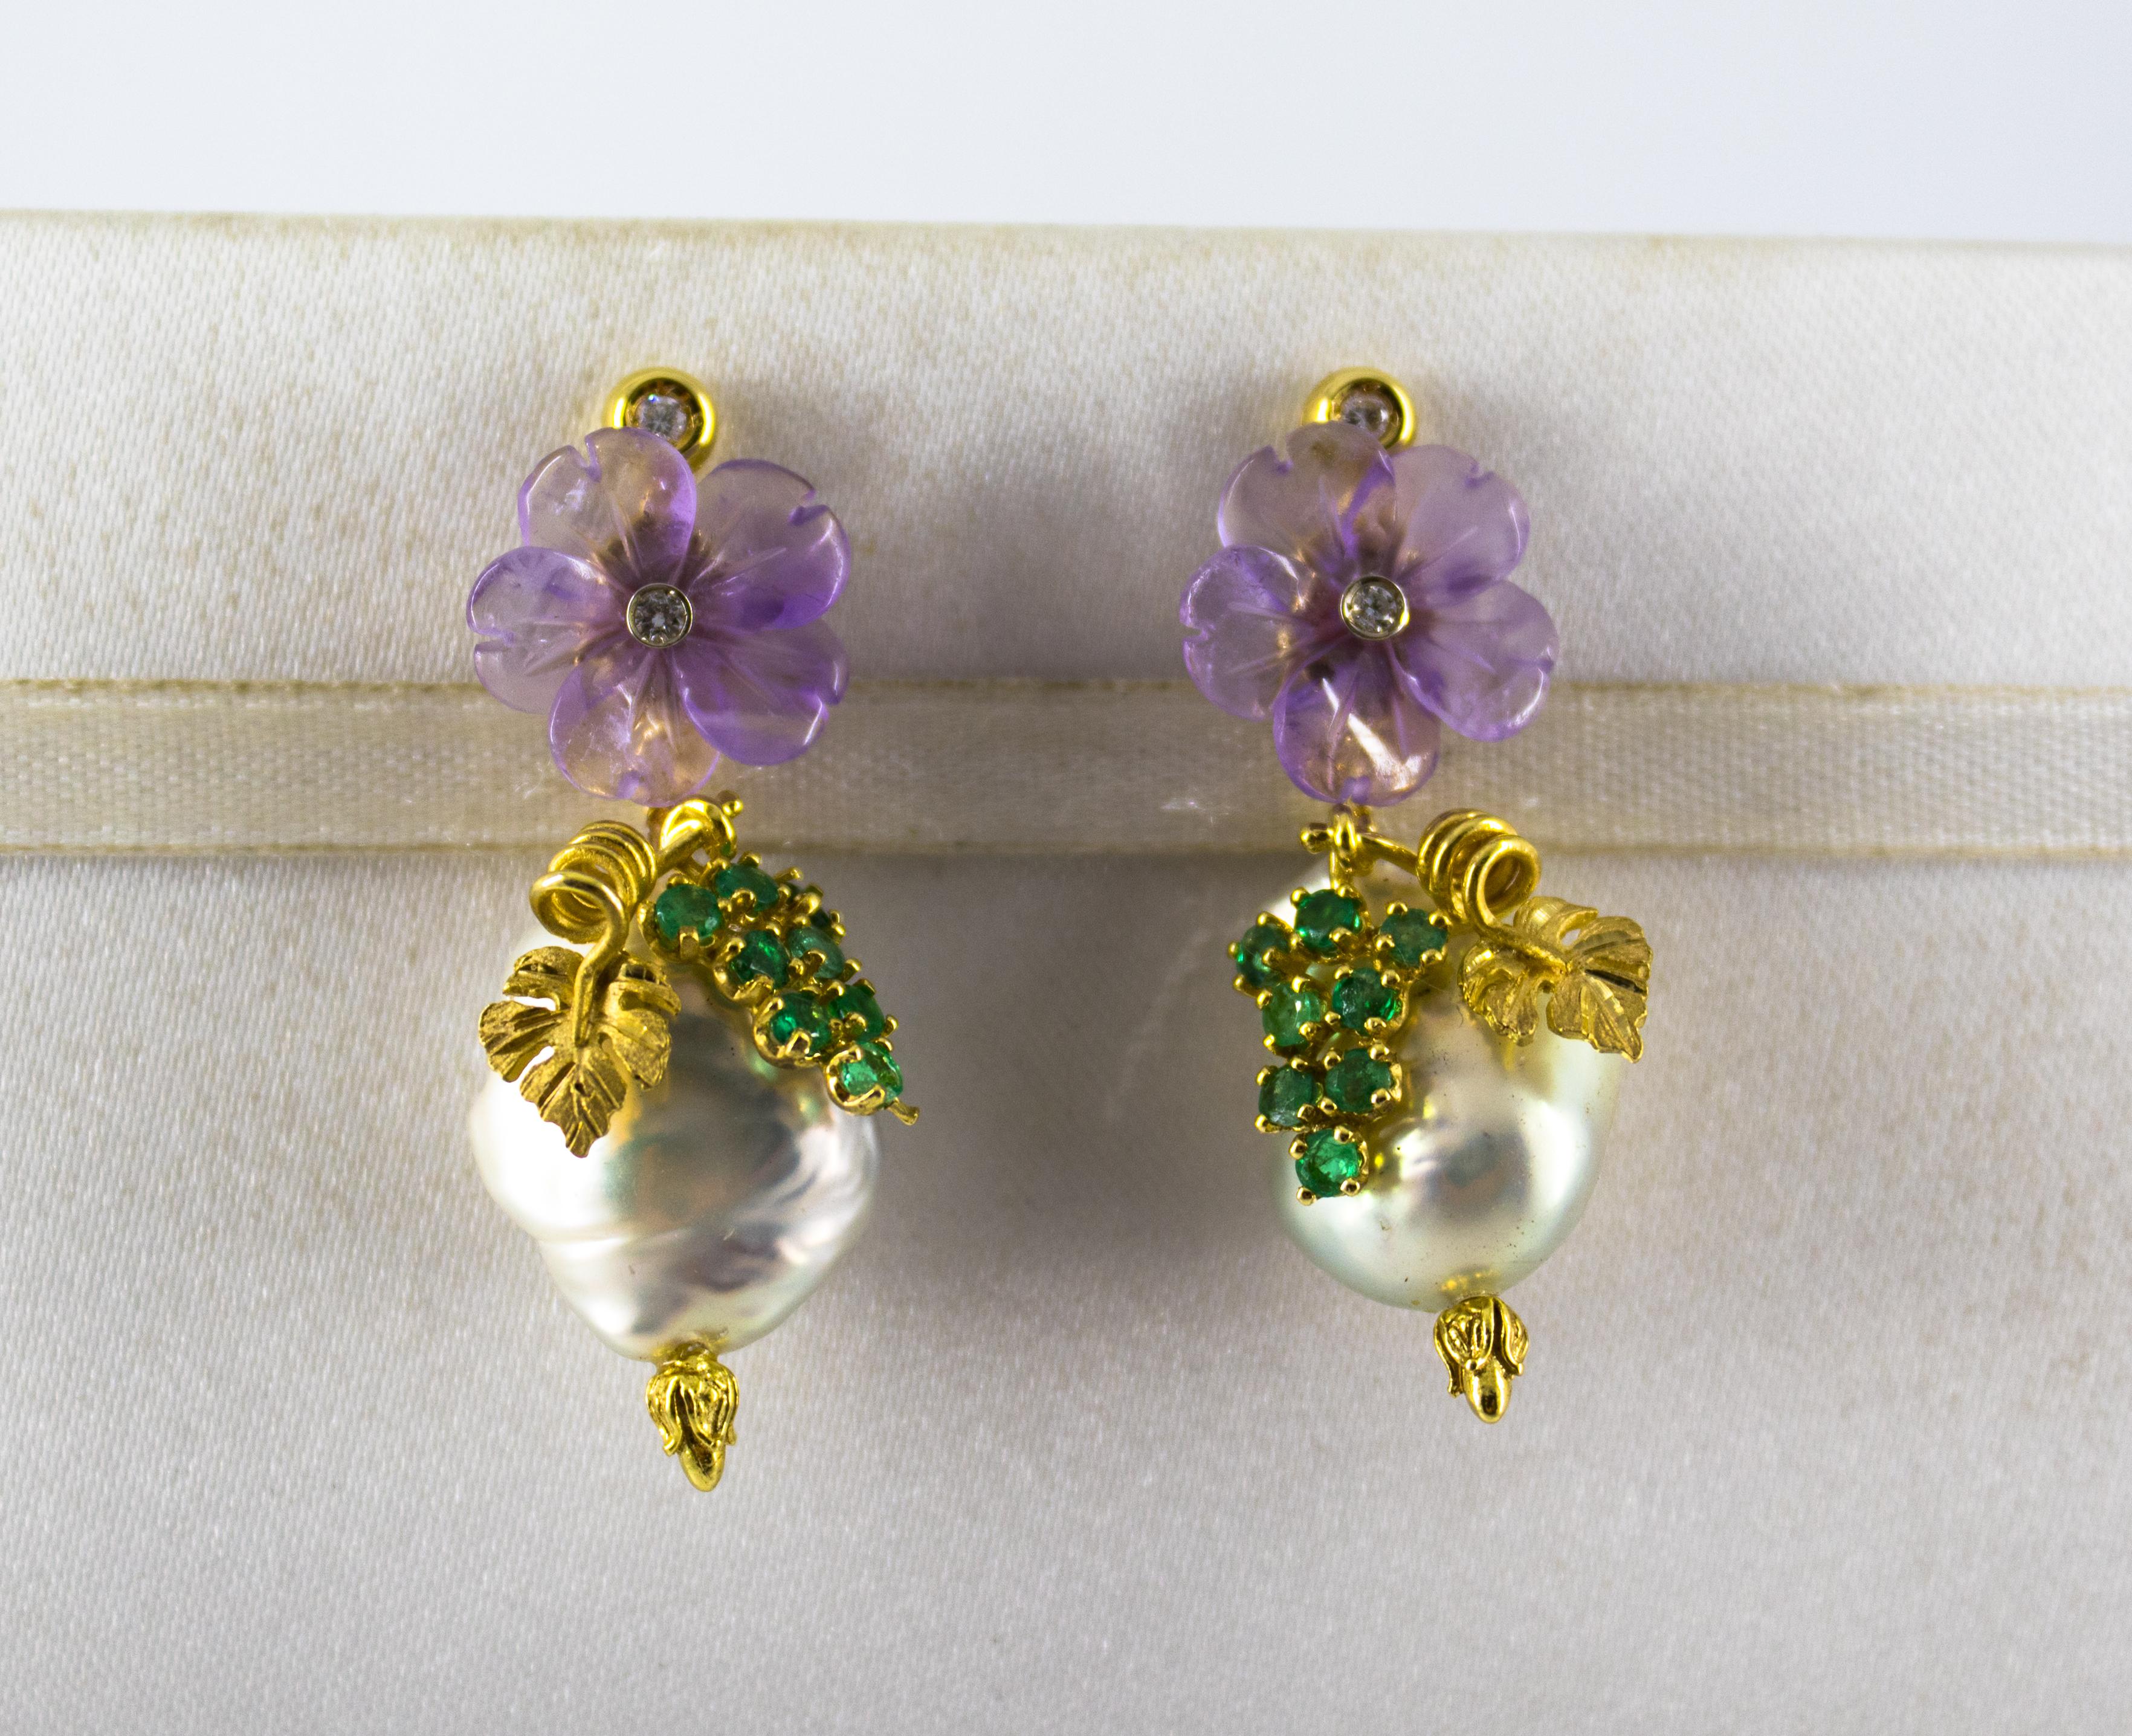 These Stud Earrings are made of 14K Yellow Gold.
These Earrings have 0.12 Carats of Diamonds.
These Earrings have 0.90 Carats of Emeralds.
These Earrings have also Pearls and Amethyst.
These Earrings are available also with Green Flowers made of